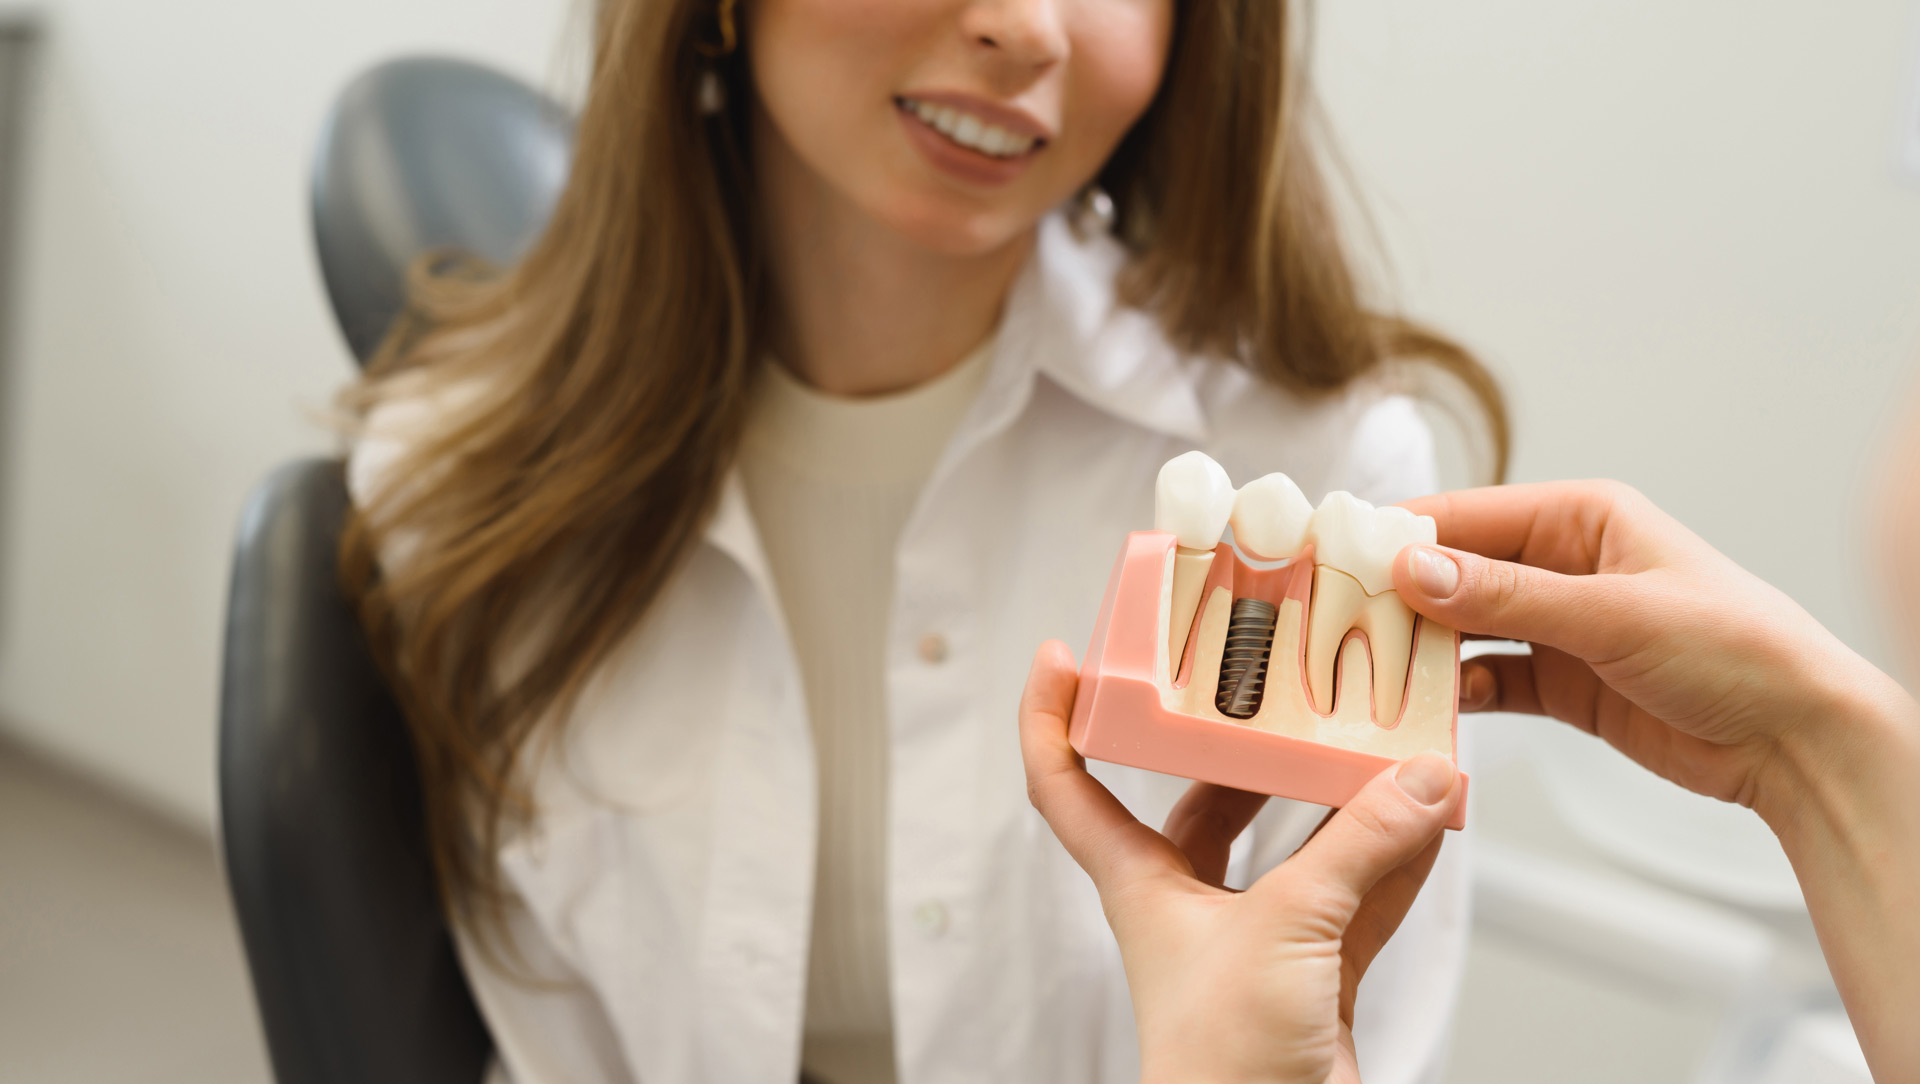 woman looking at a scale model of teeth implants